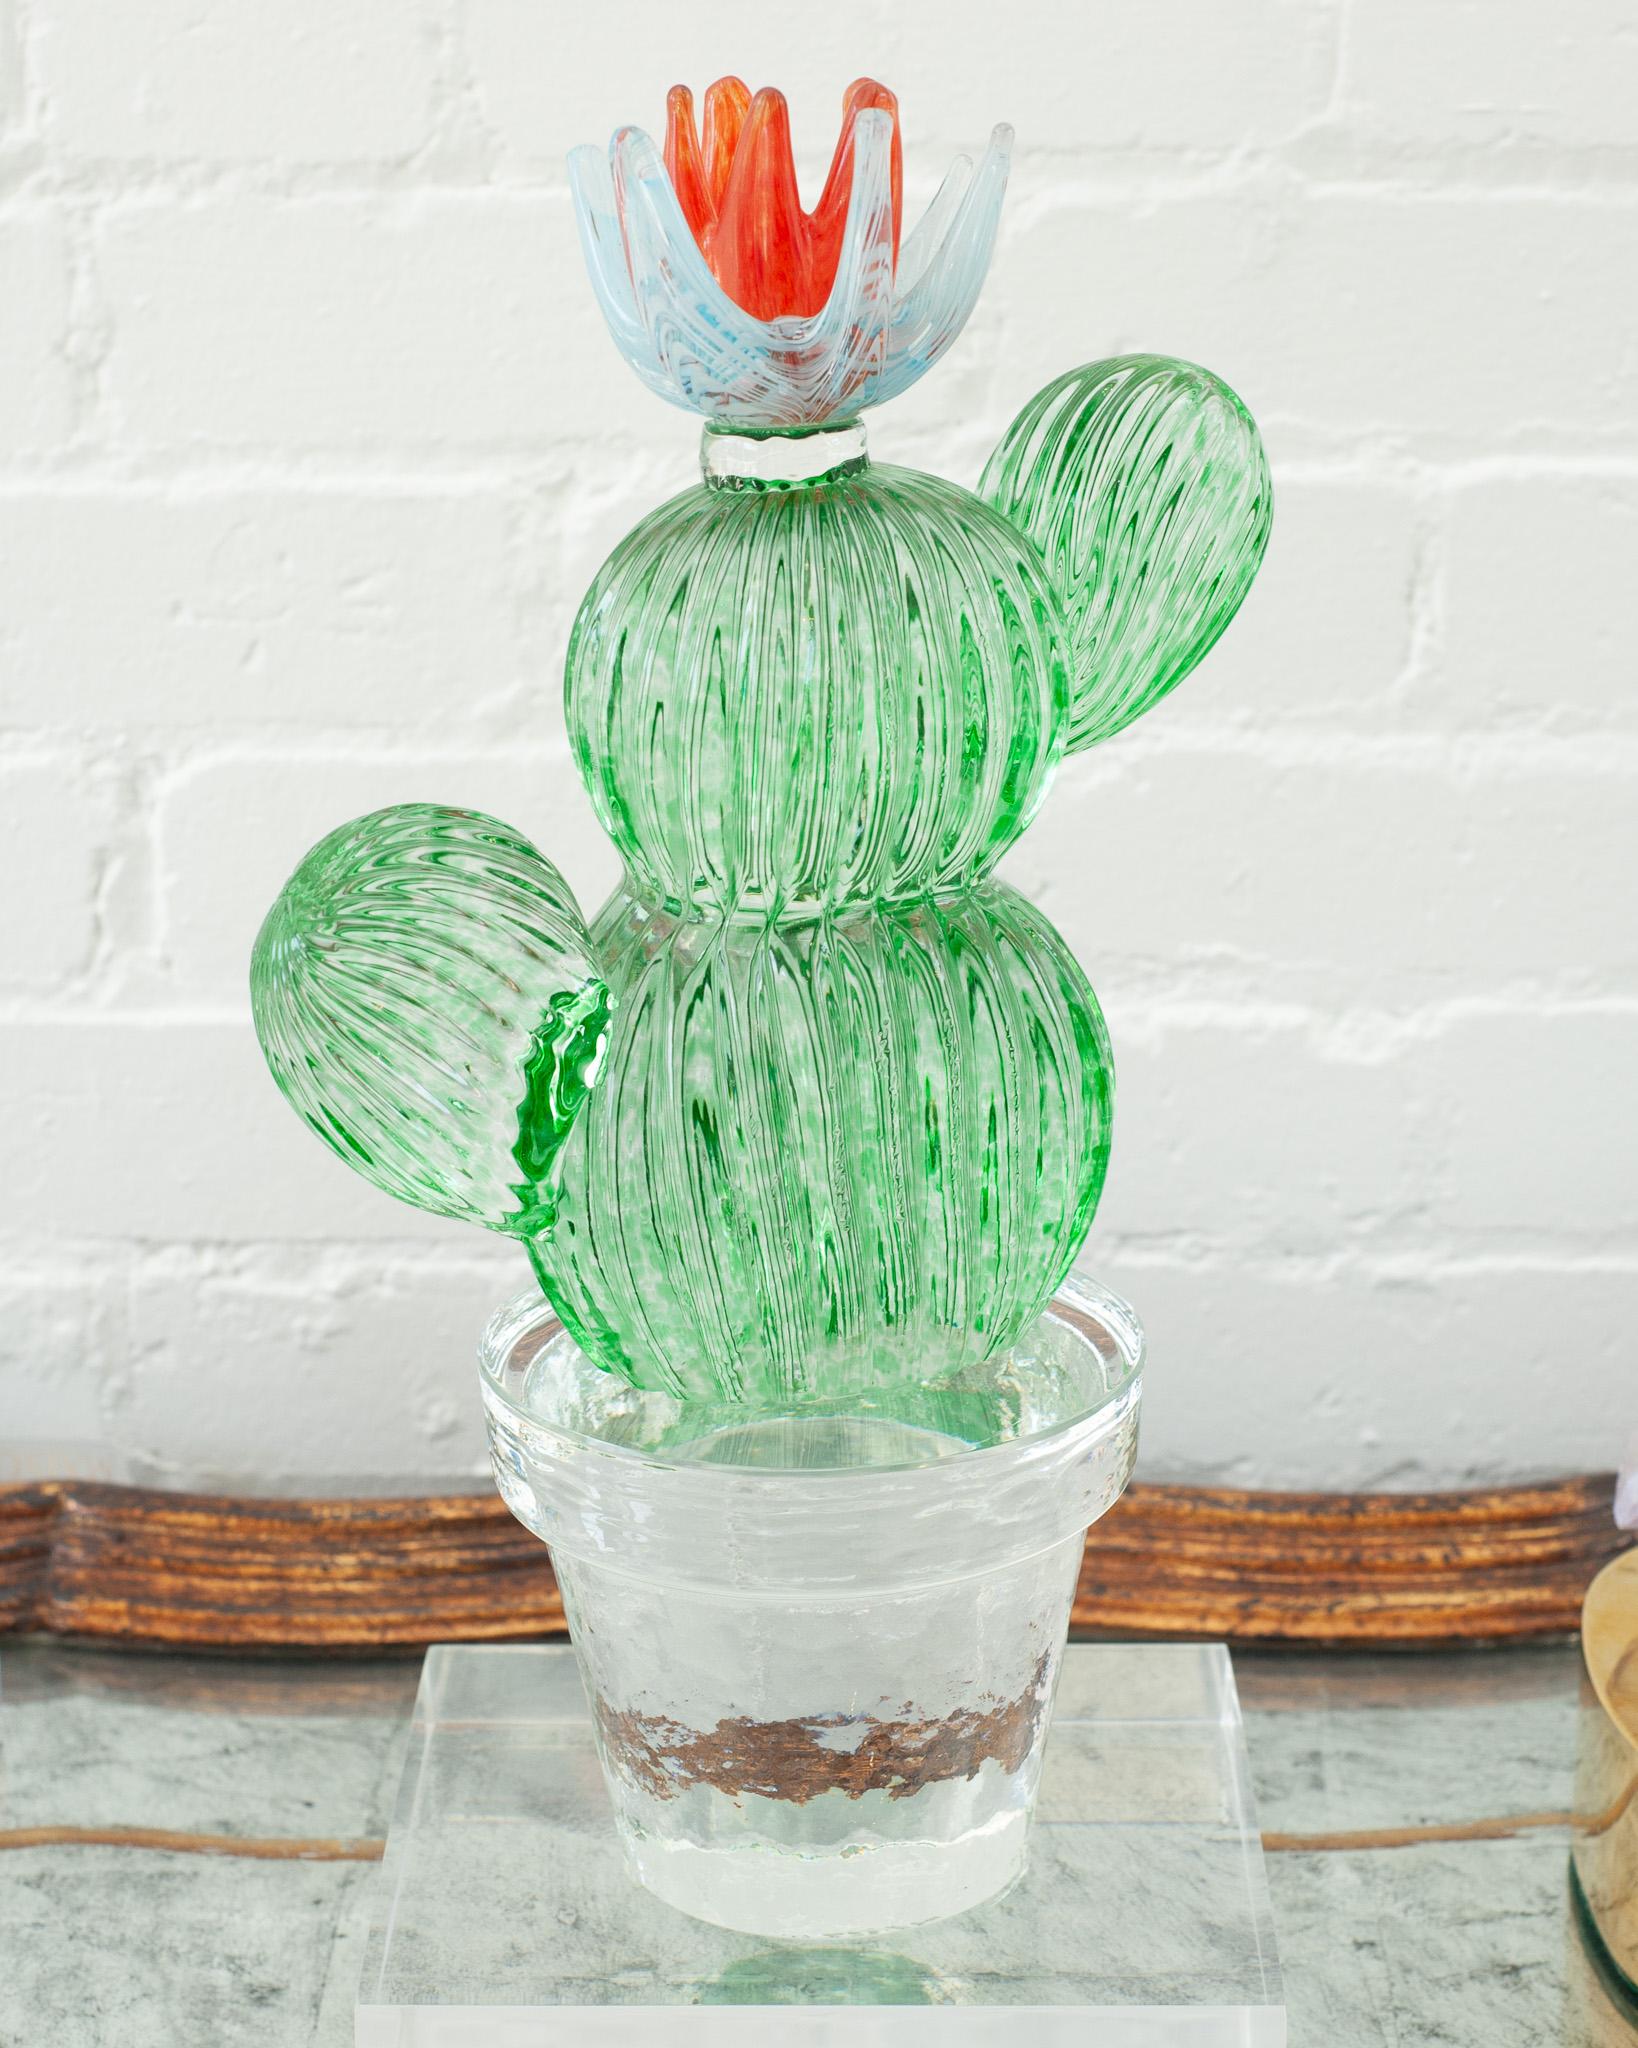 A stunning  vintage signed Marta Marzotto murano glass cactus circa 1990 just arrived at Maison Nurita. Entirely handblown in glass, this unusual and vibrant sculpture was made by the famed Italian fashion and jewelry designer. Signed and numbered